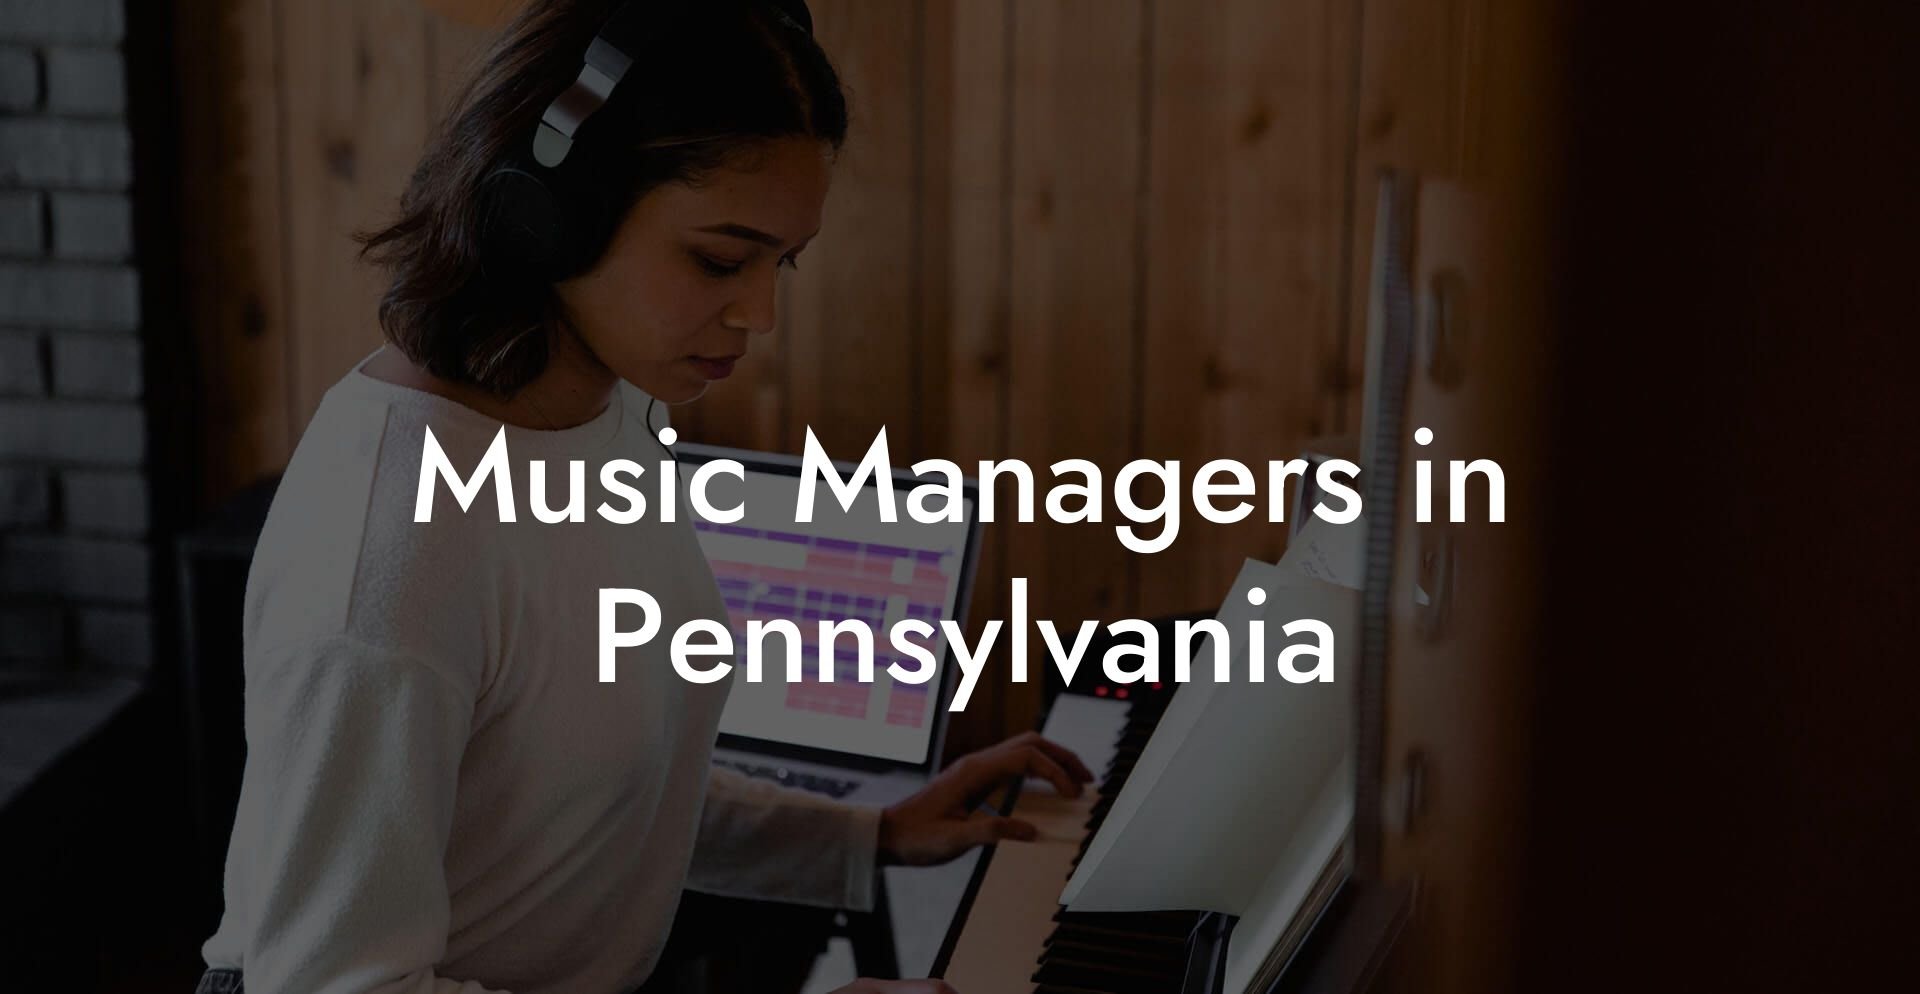 Music Managers in Pennsylvania